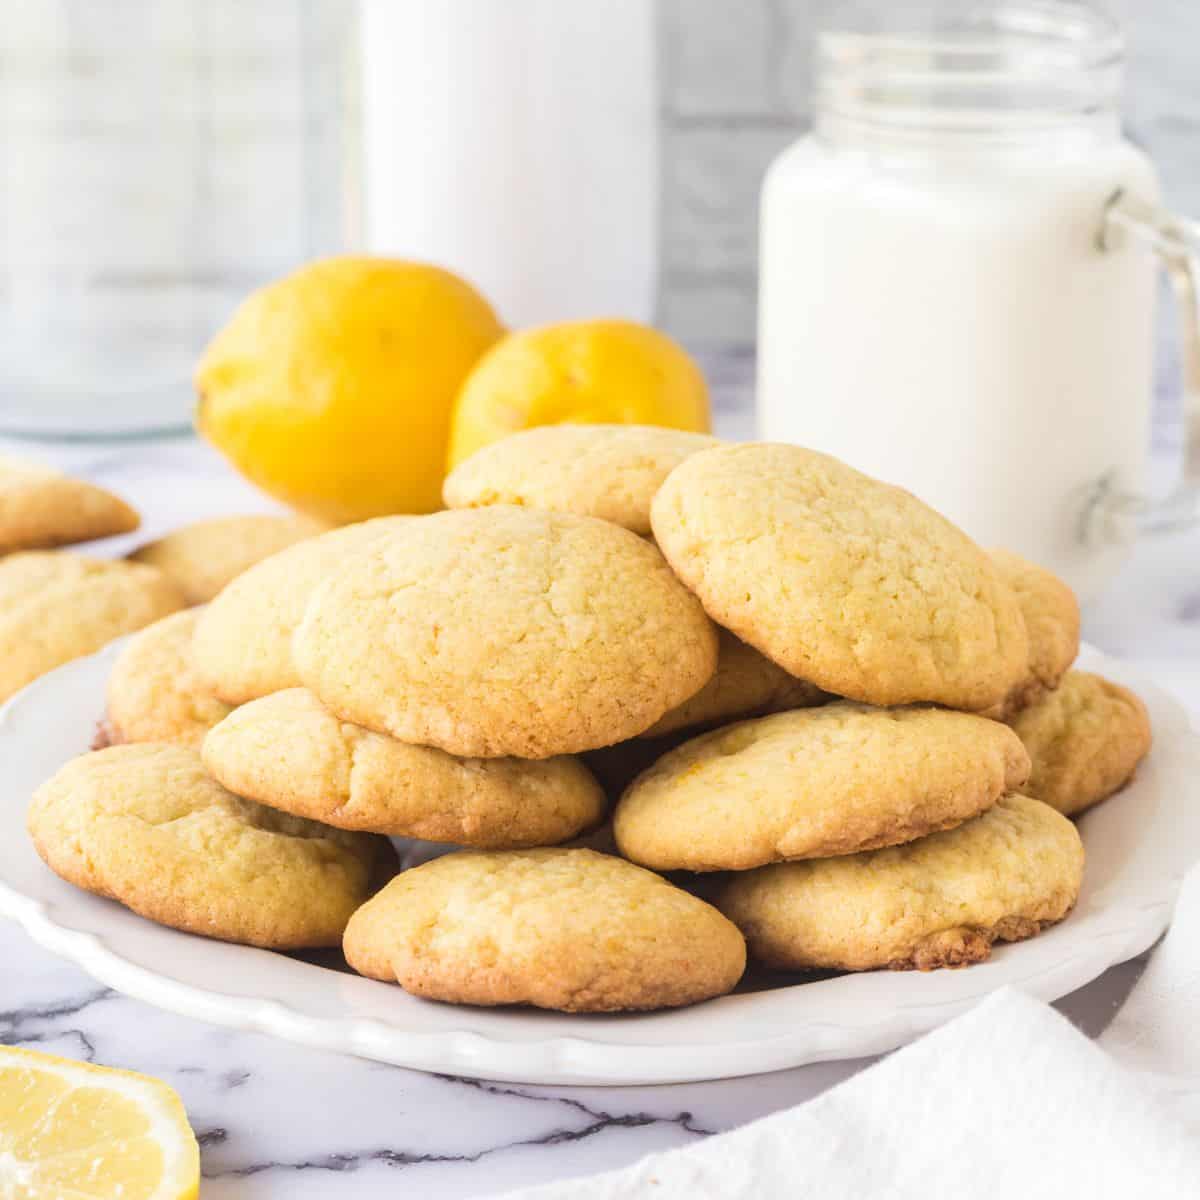 Sugar Free Lemon Pudding Cookies, a delicious soft and chewy lemony dessert or snack recipe made with no added sugar.